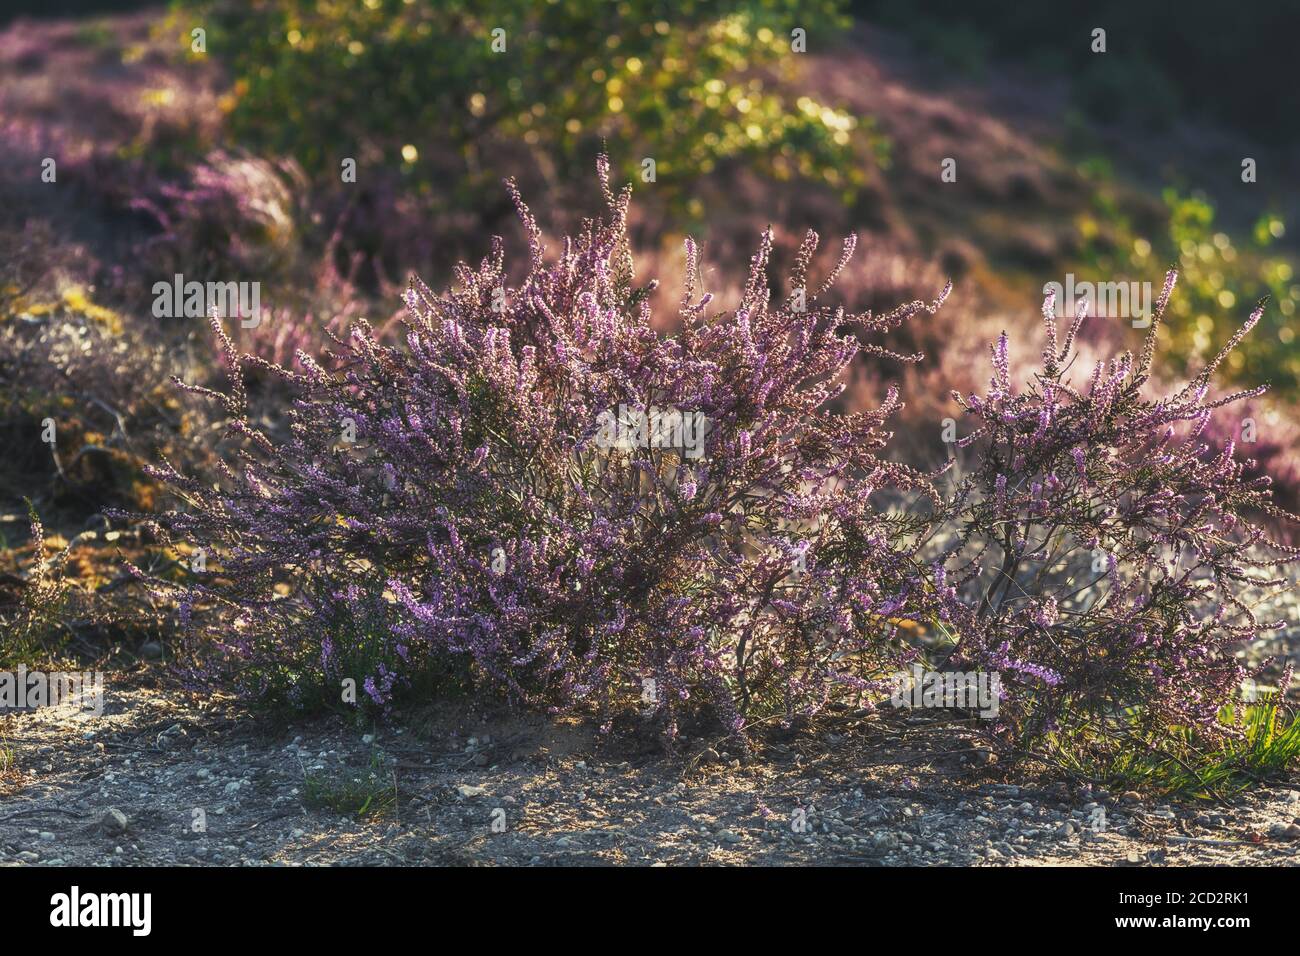 Heather shrub in the light of the setting sun in The Netherlands Stock Photo